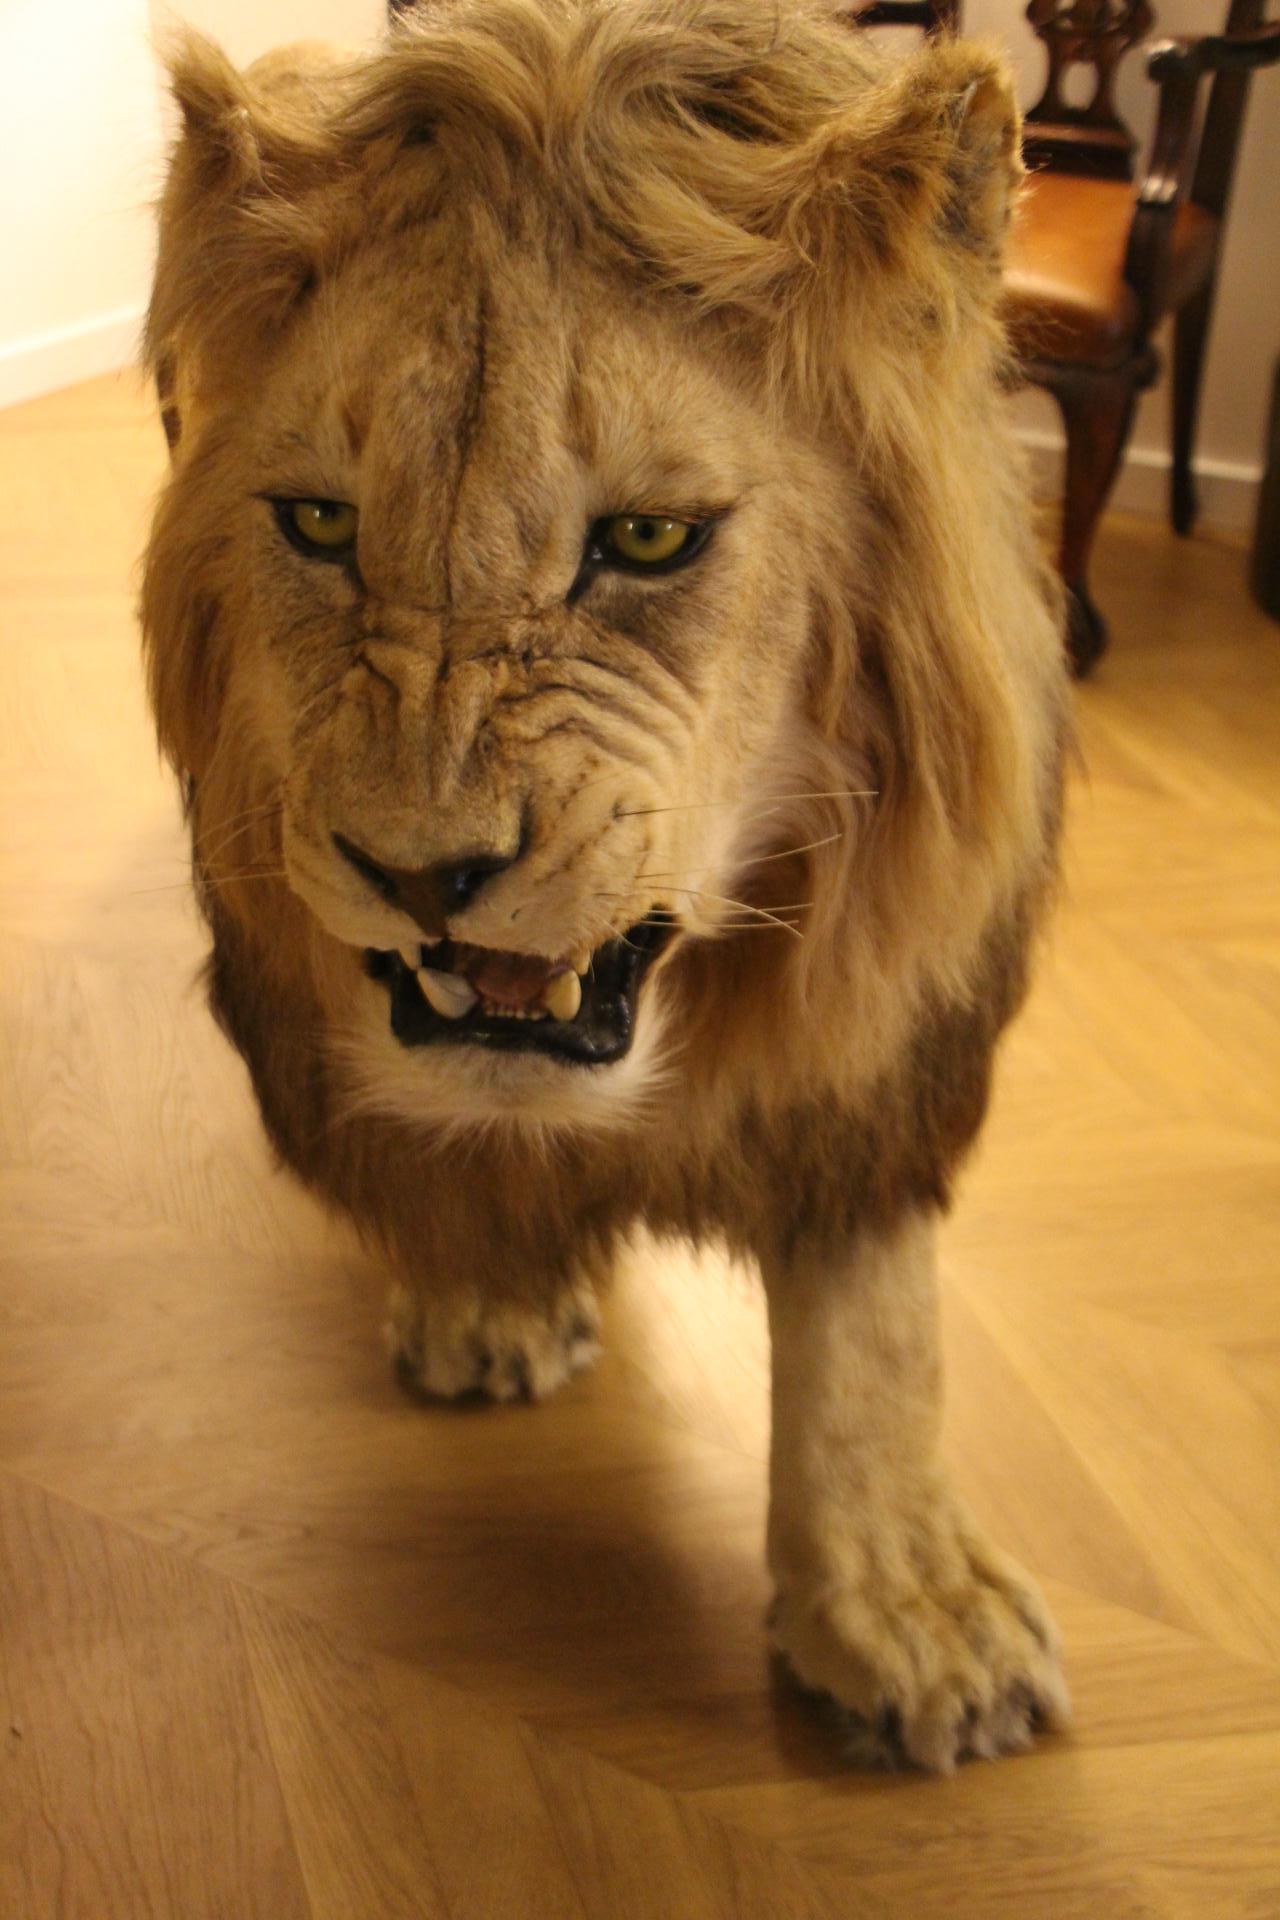 This is a superb early 21st century taxidermy of an African lion, complete with all relevant paperwork. The lion stands in a lovely hunting pose and has an impressive 105 cm tall and 246 cm long. It is amazingly real. Museum quality.
One of the